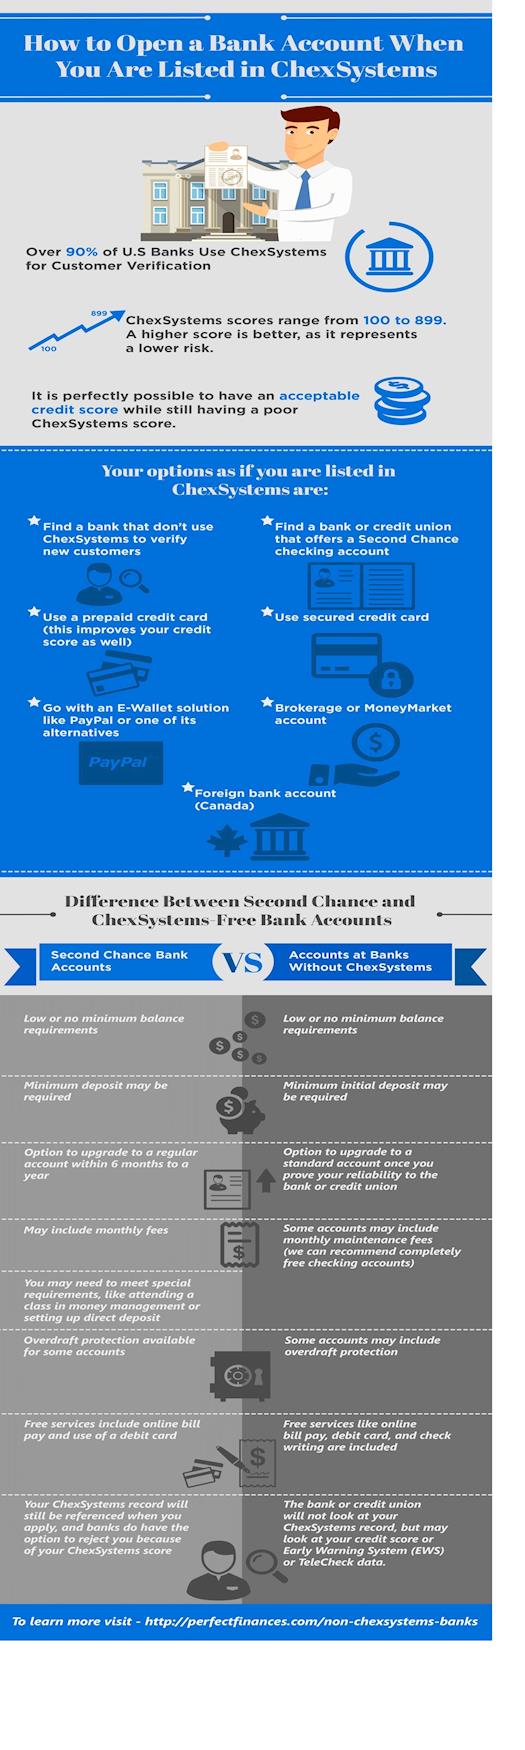 Difference Between Second Chance and ChexSystems-Free Bank Accounts